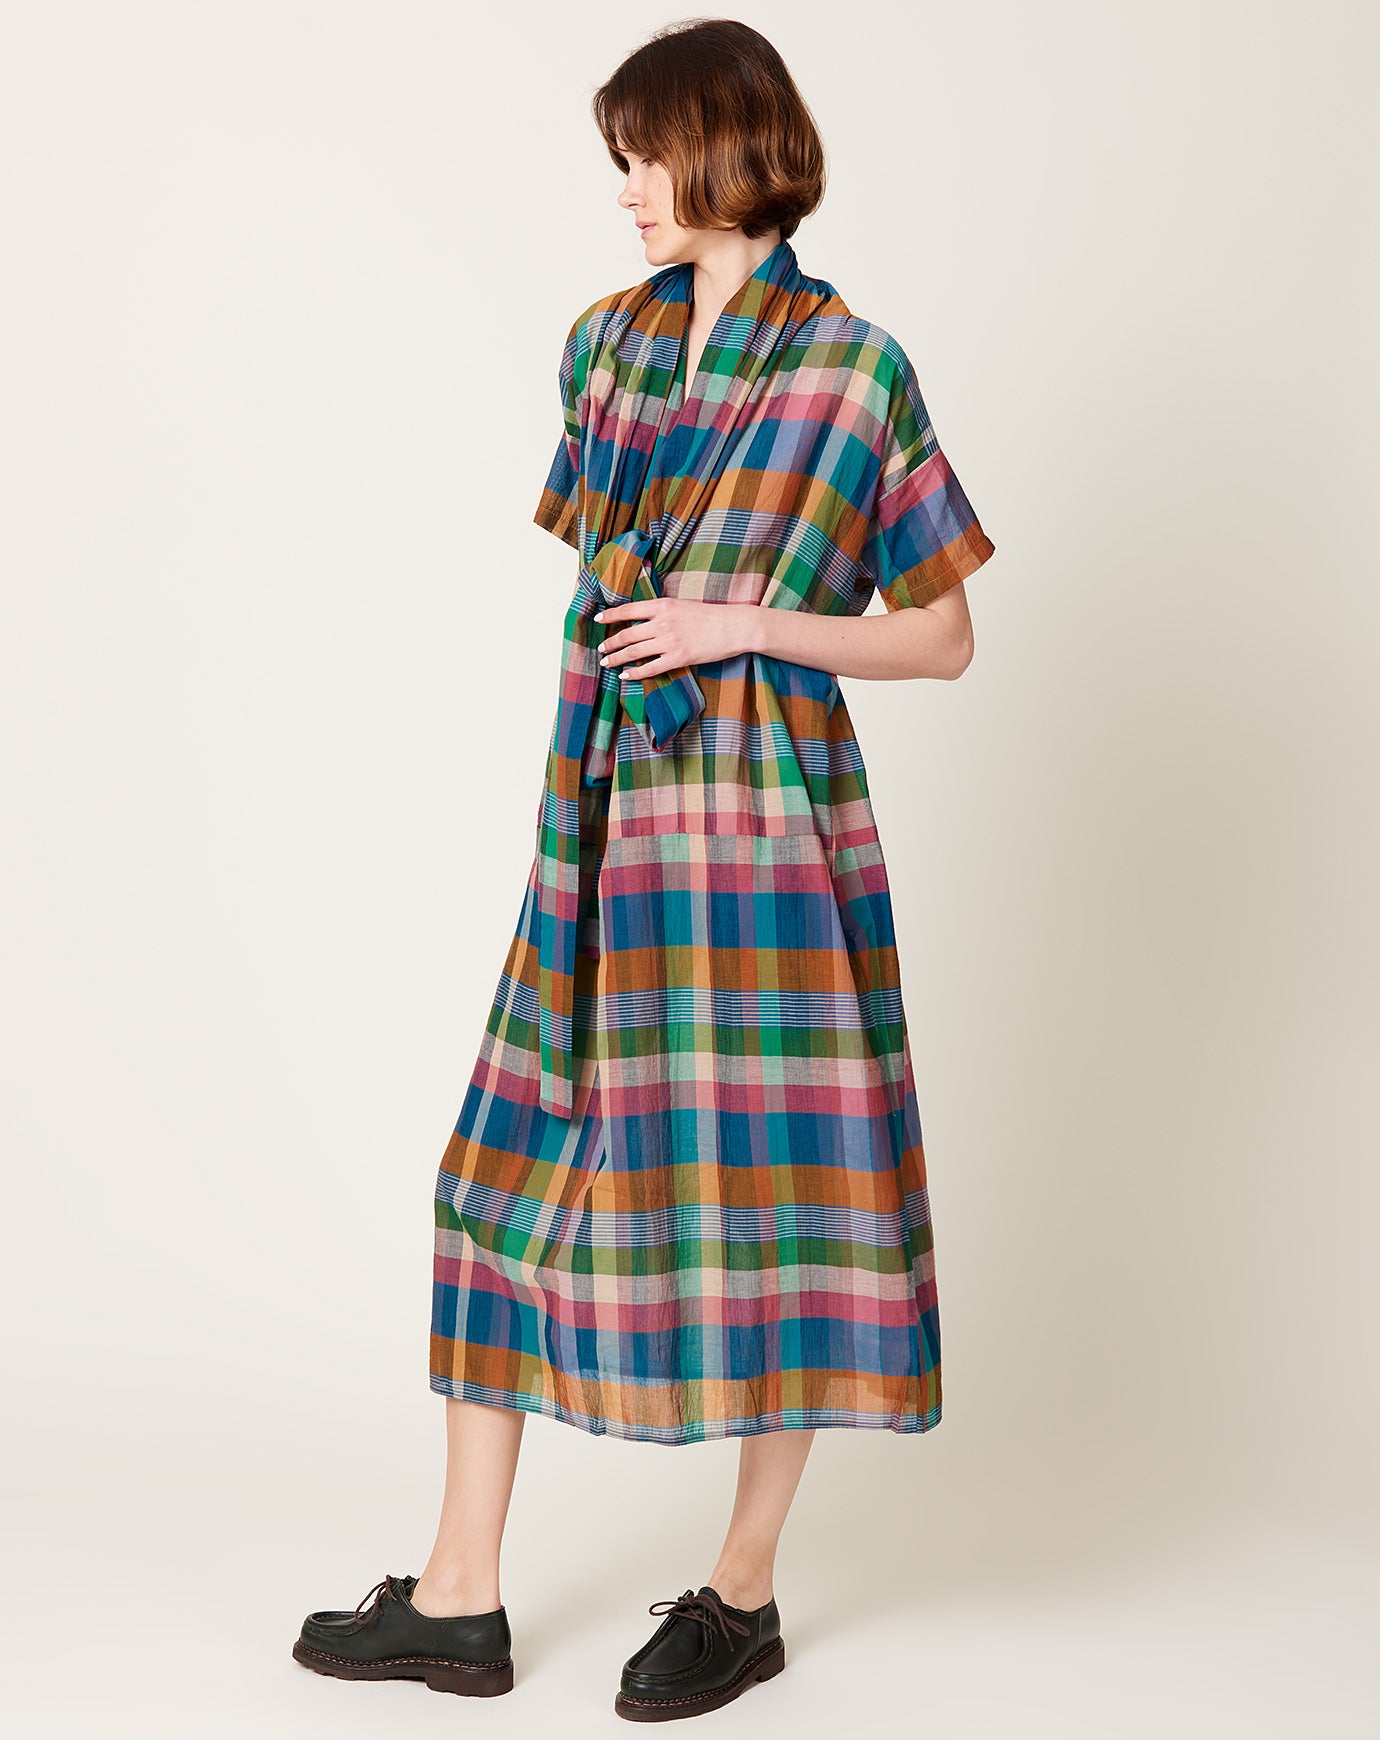 Caron Callahan Julien Dress in Bright Space Dyed Plaid